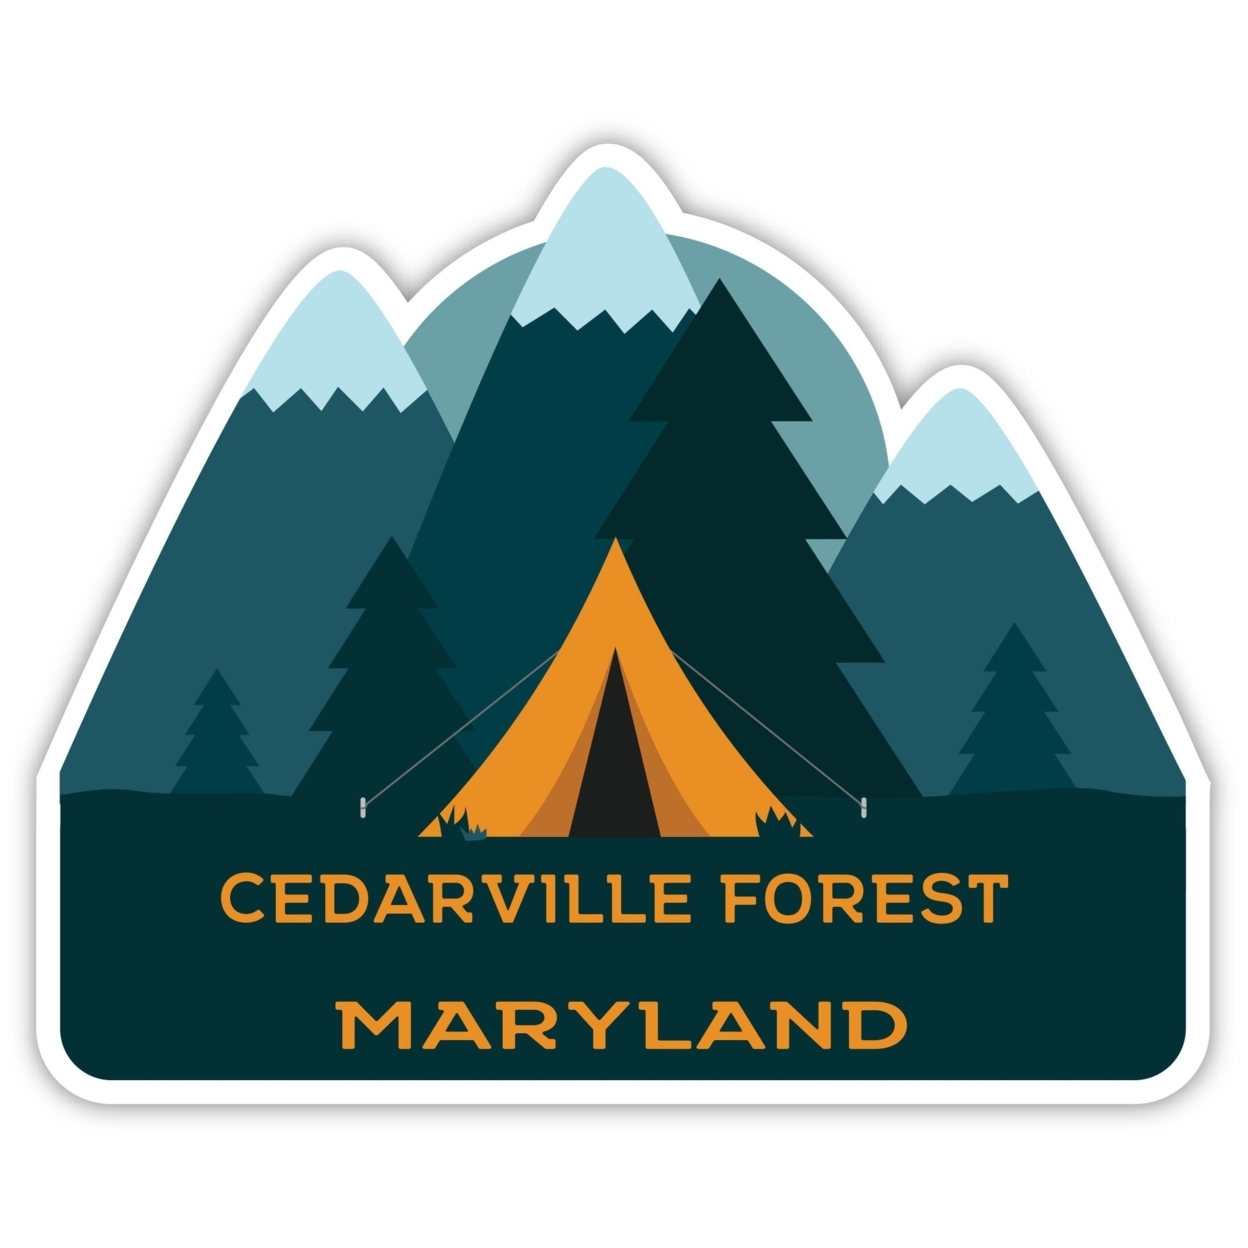 Cedarville Forest Maryland Souvenir Decorative Stickers (Choose Theme And Size) - Single Unit, 2-Inch, Tent